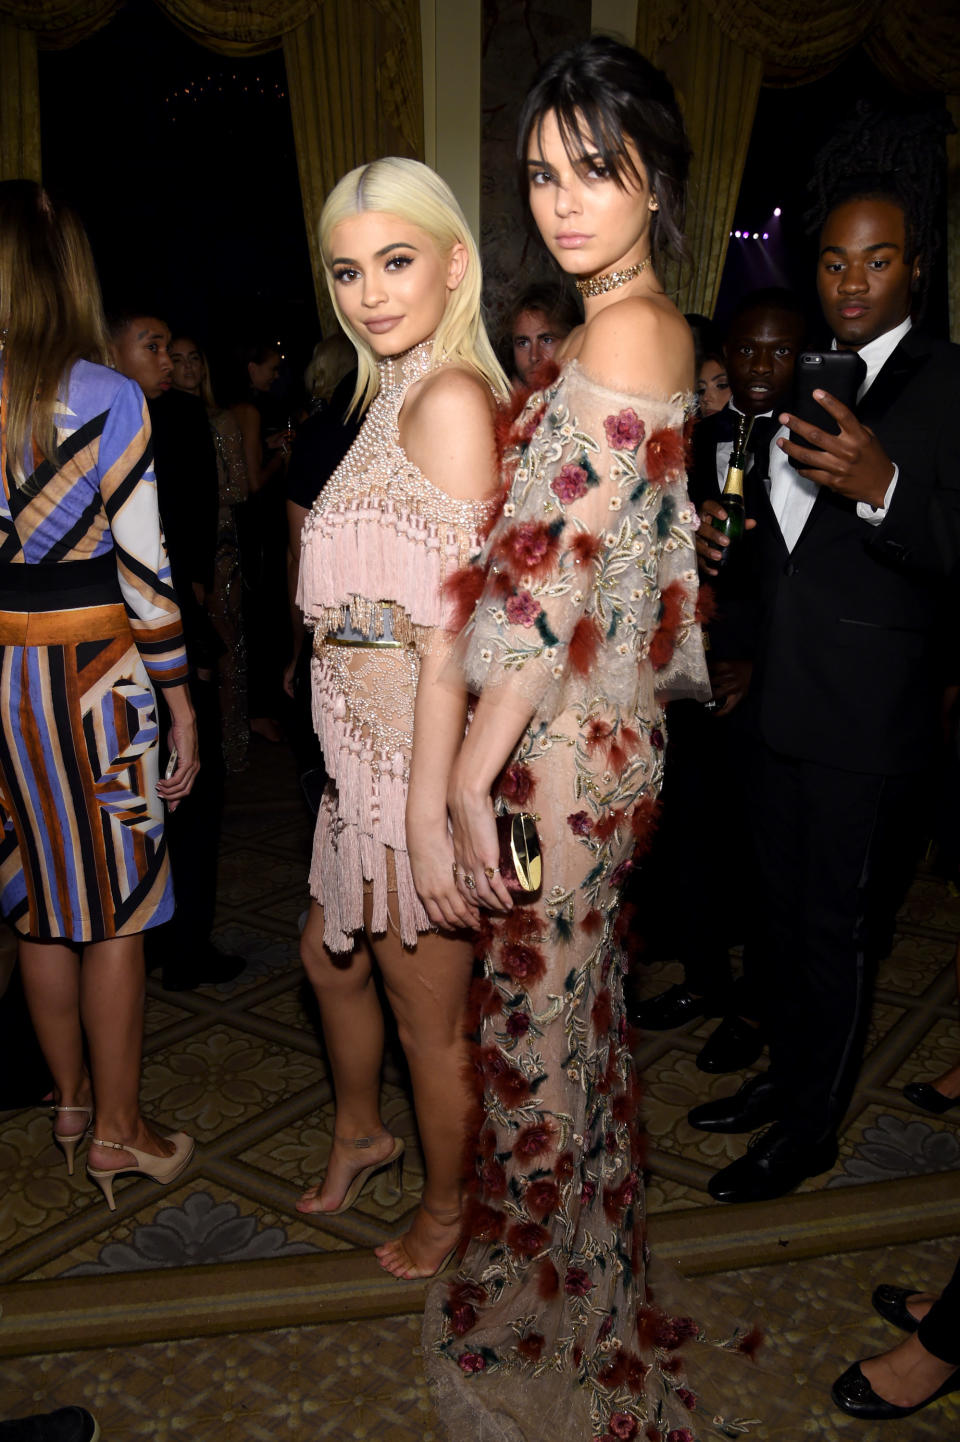 NEW YORK, NY - SEPTEMBER 09: Kylie Jenner and Kendall Jenner during Harper's Bazaar's celebration of 'ICONS By Carine Roitfeld' presented by Infor, Laura Mercier, and Stella Artois  at The Plaza Hotel on September 9, 2016 in New York City.  (Photo by Jamie McCarthy/Getty Images for Harper's Bazaar)